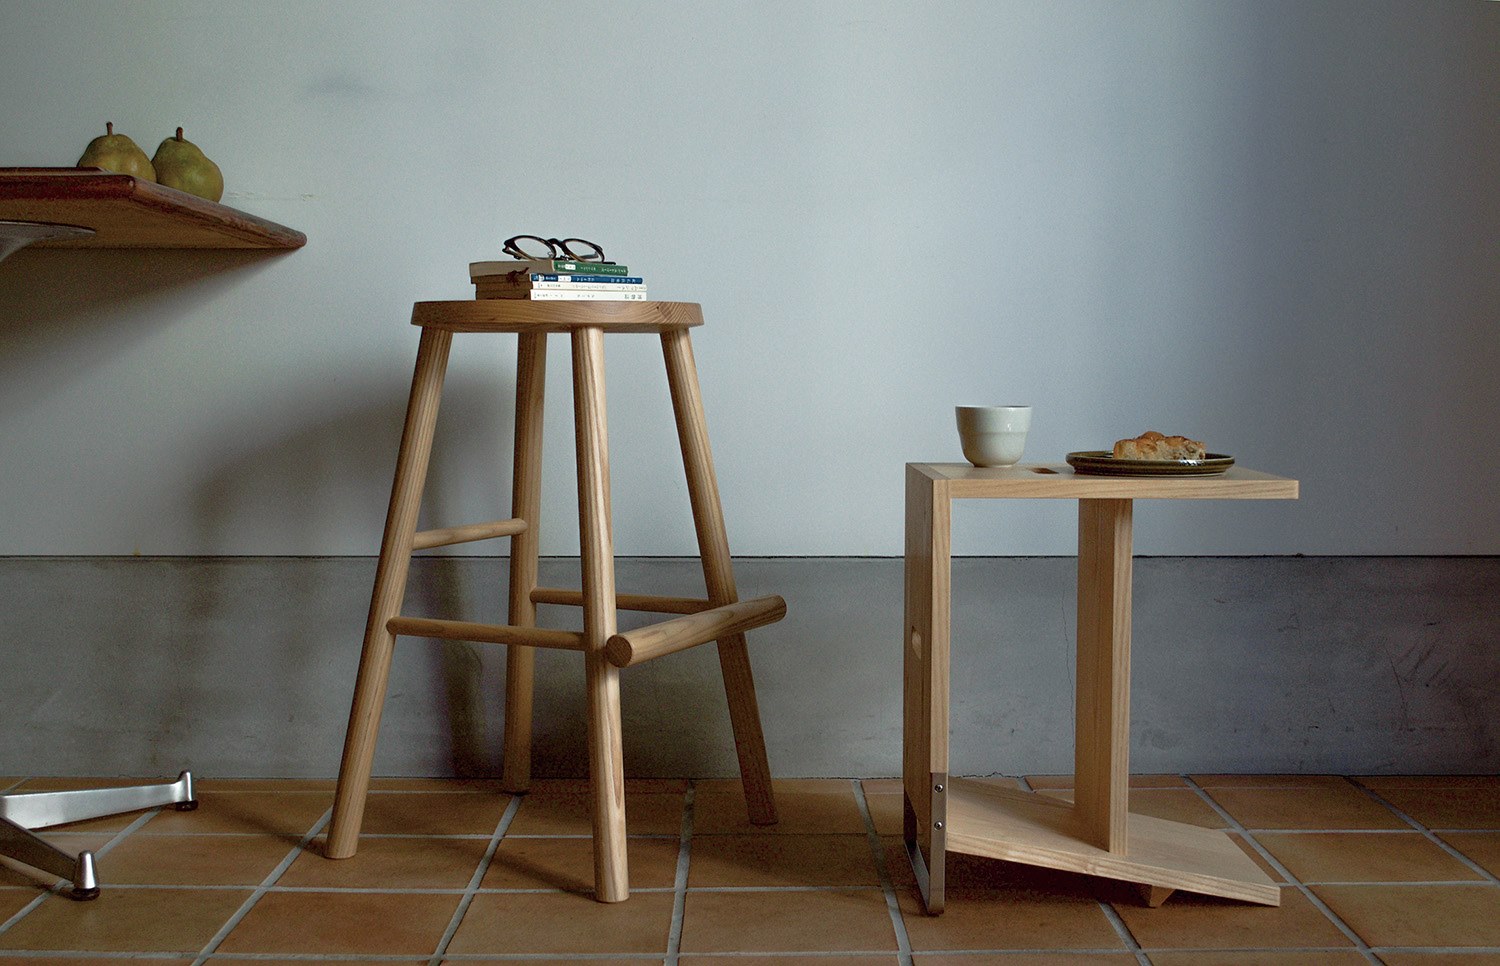 「books and coffee and stool」